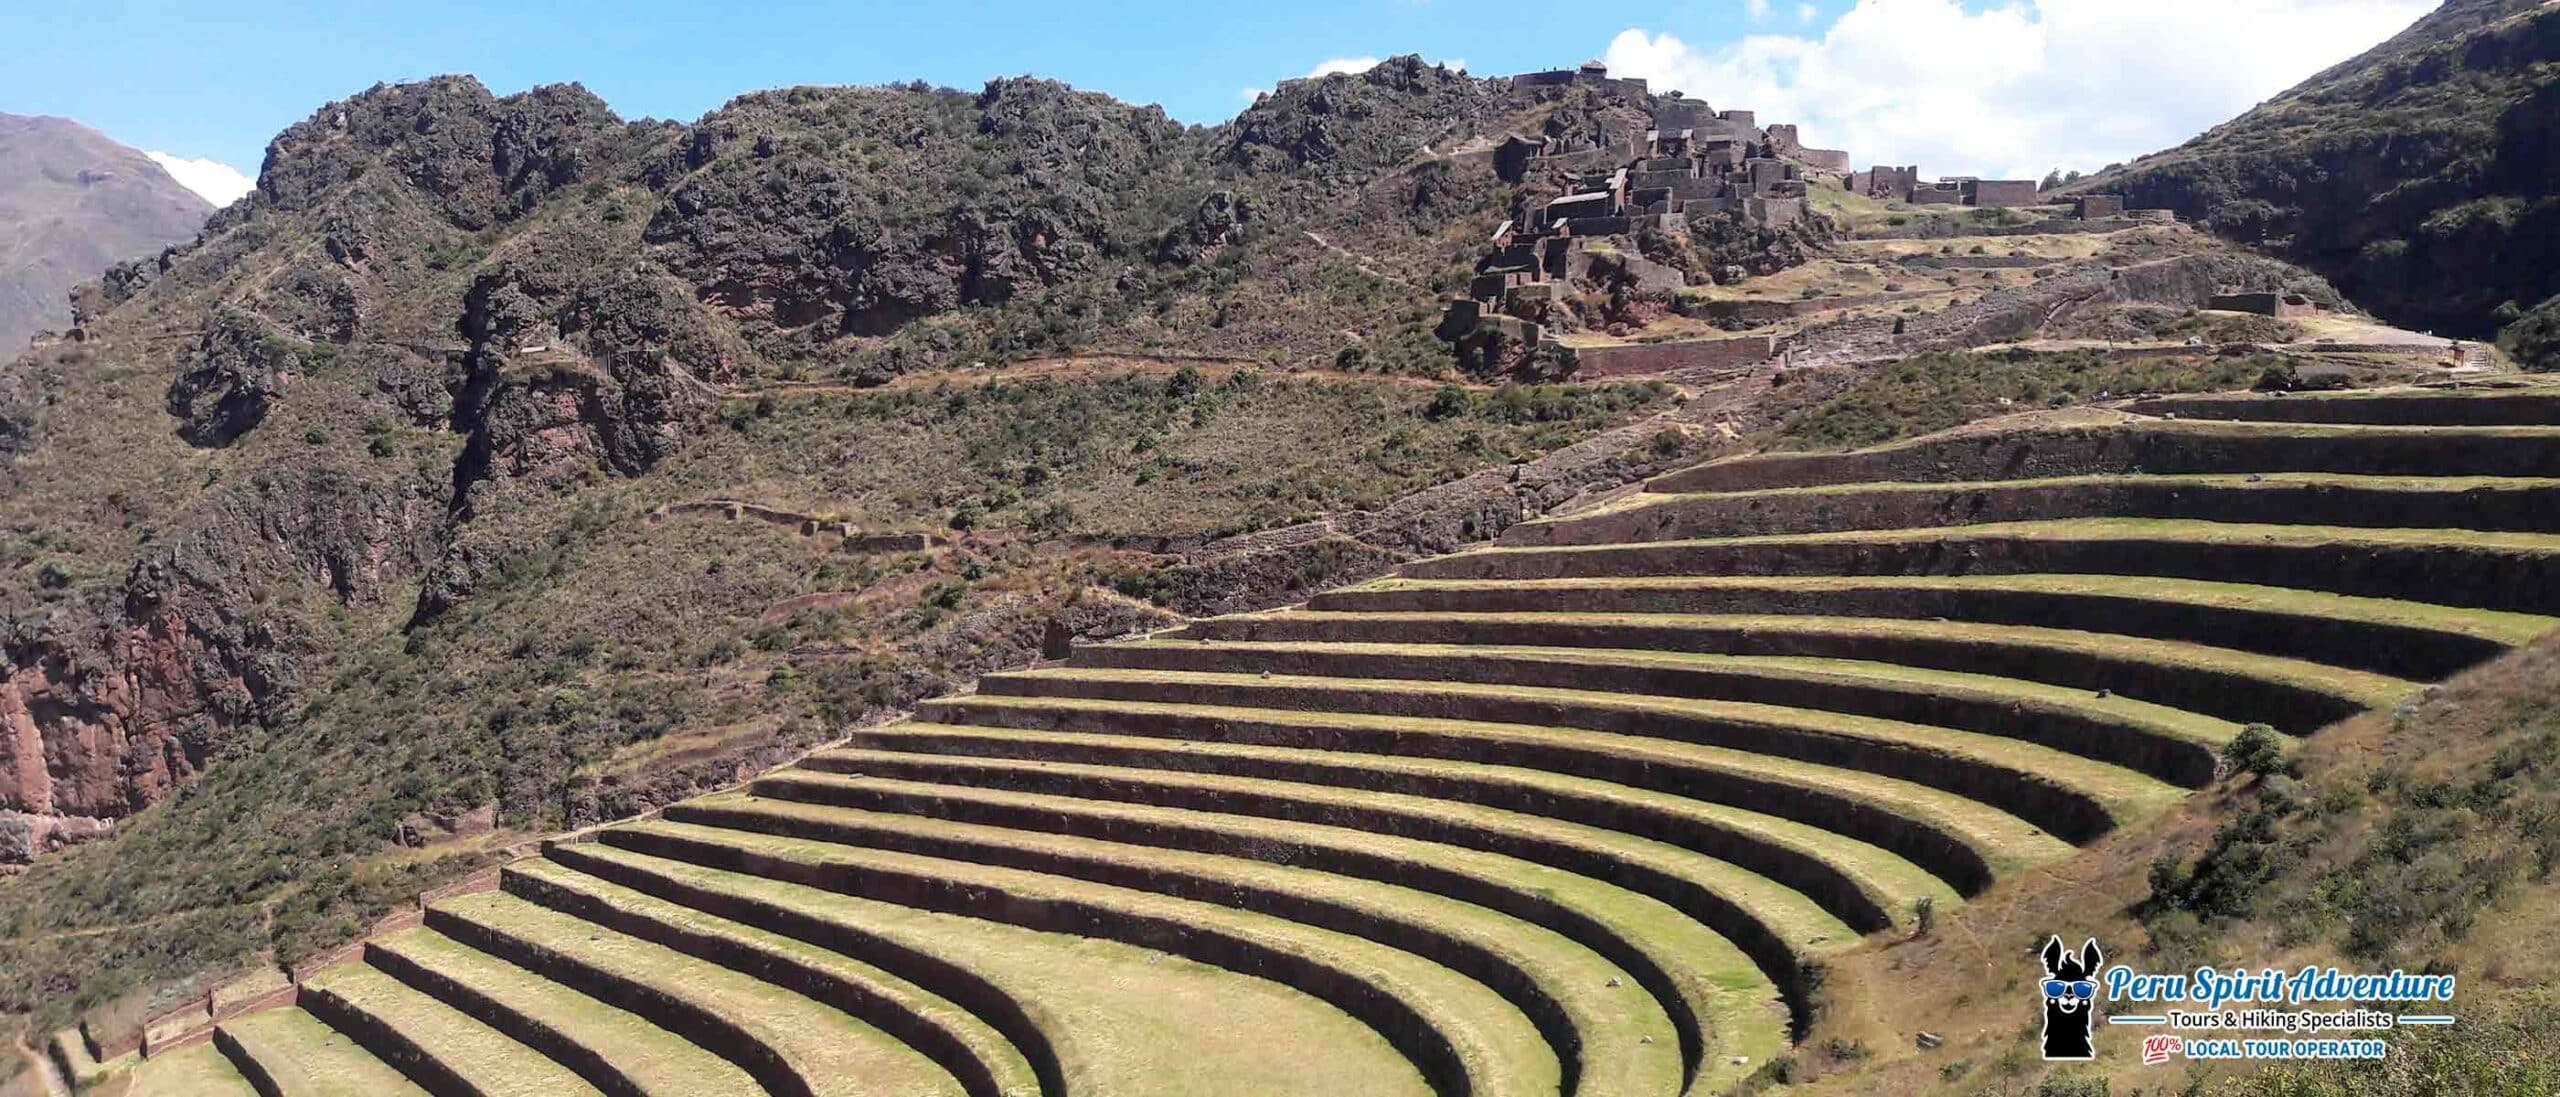 The archaeological site of Pisac